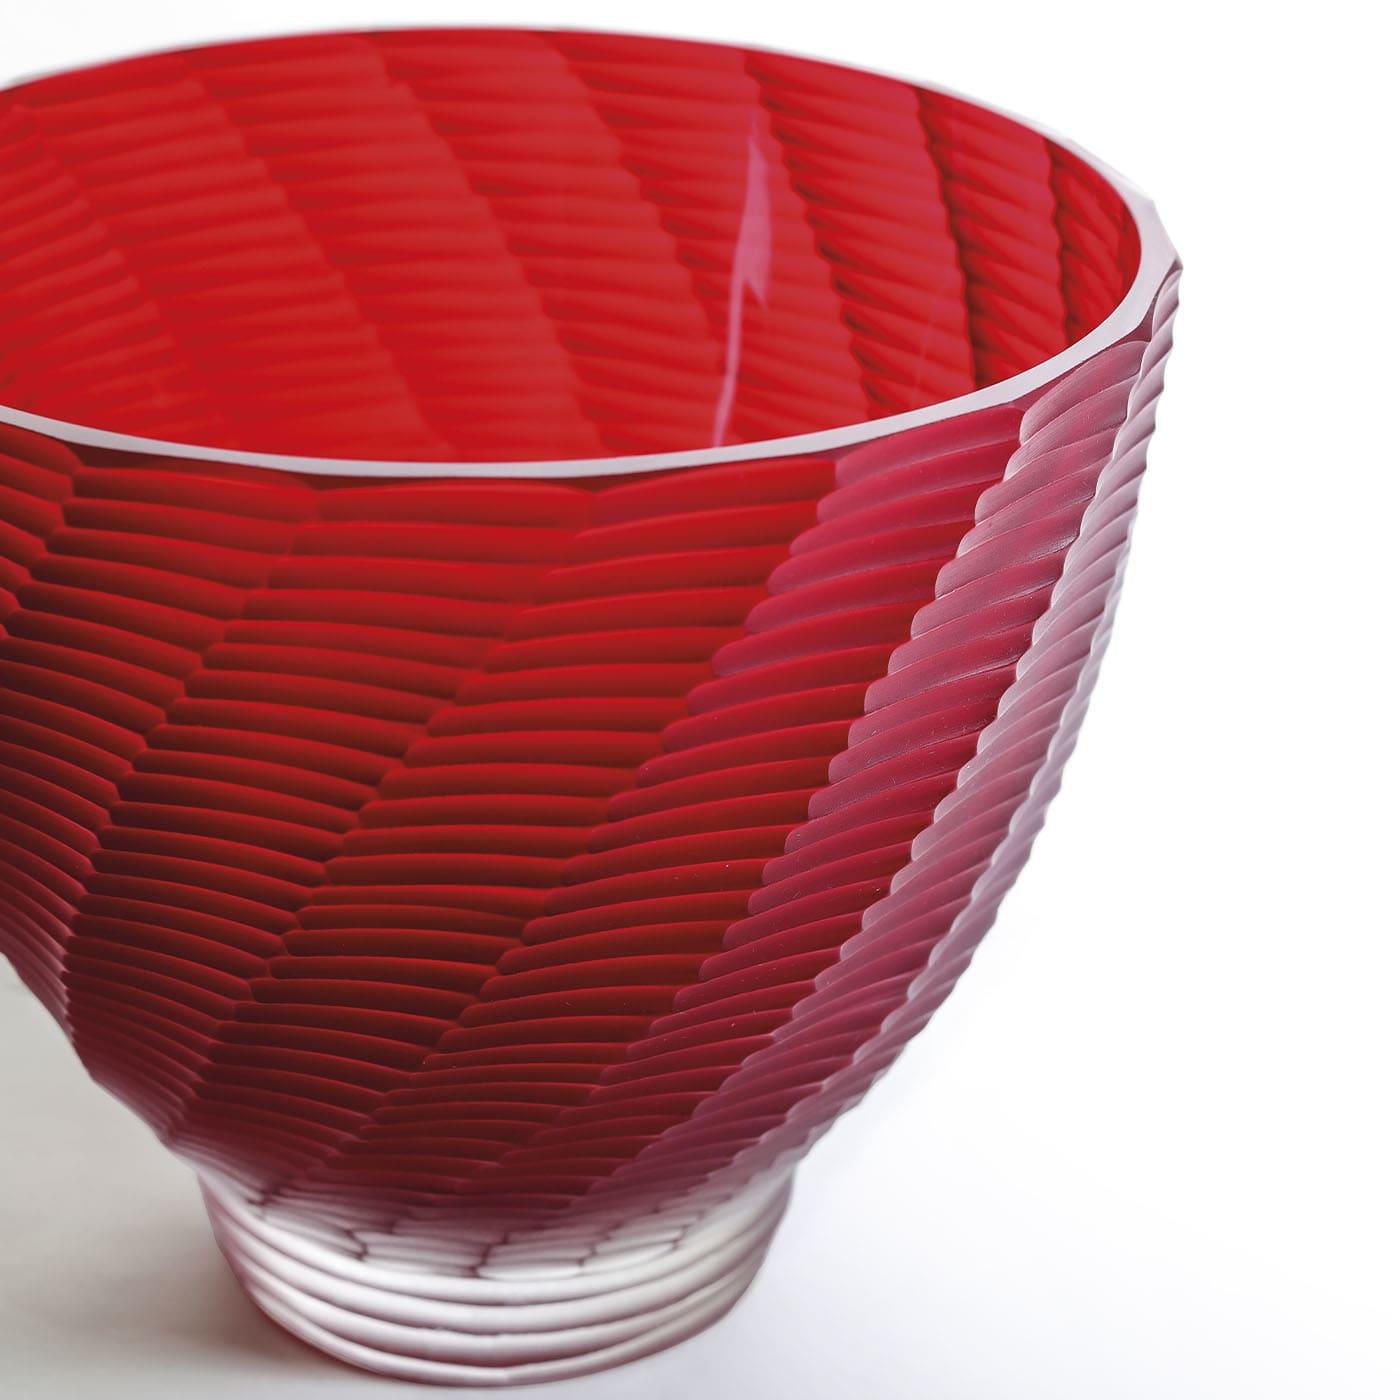 A painstaking process of manual grinding is behind the twisted texture of segments extensively characterizing this precious bowl. Crafted from mouth-blown red Murano glass and indeed unique, it also showcases an intriguing contrast of finishes